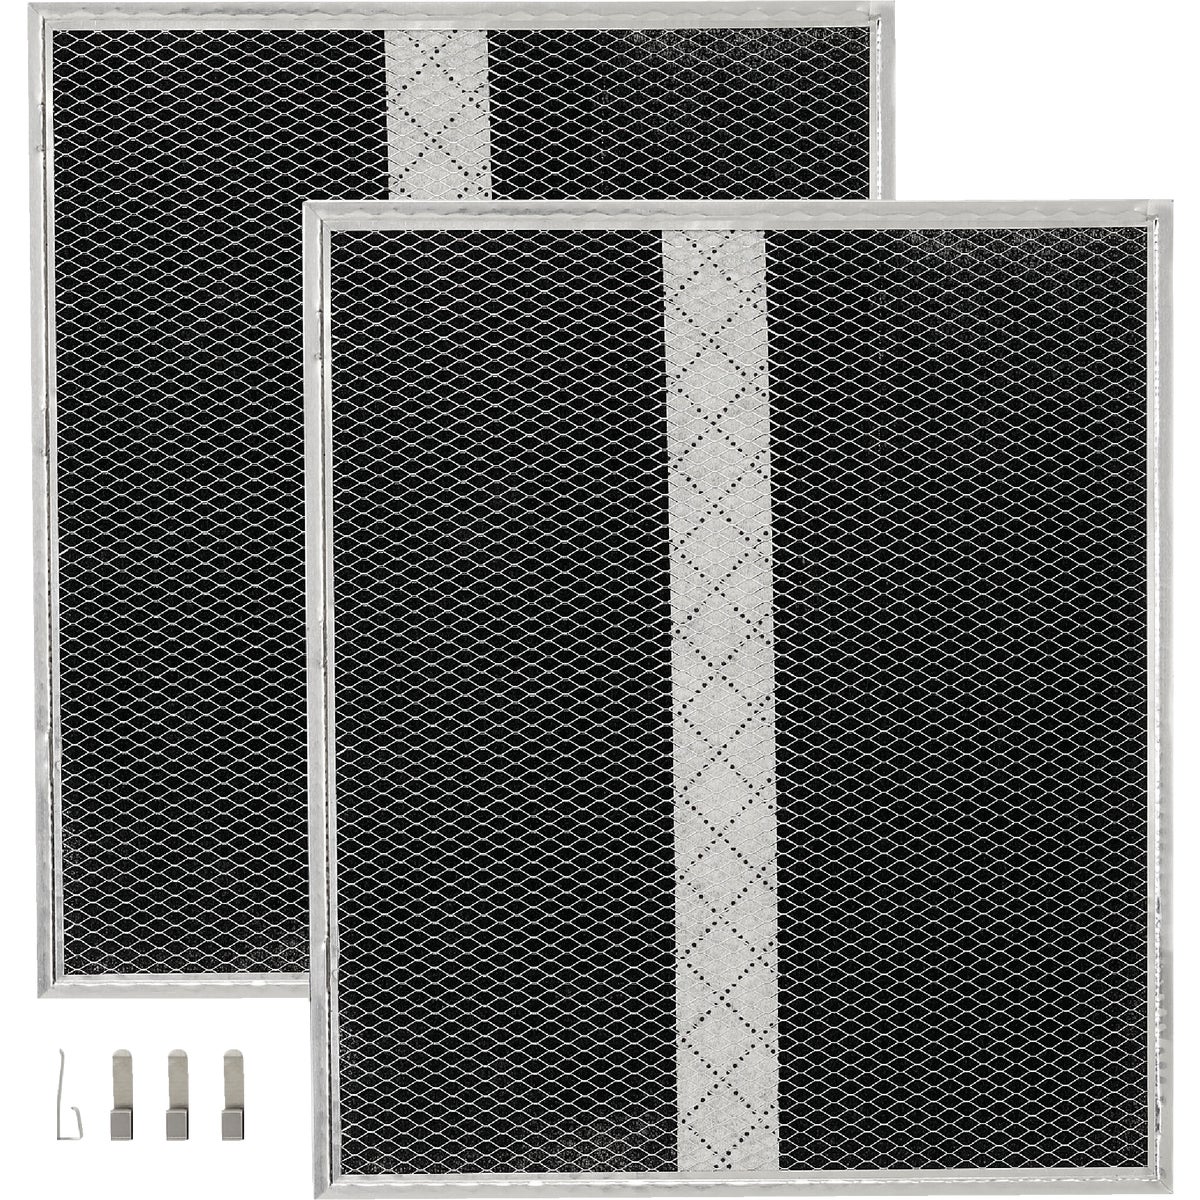 Broan-Nutone Non-Ducted Charcoal Range Hood Filter (2-Pack)